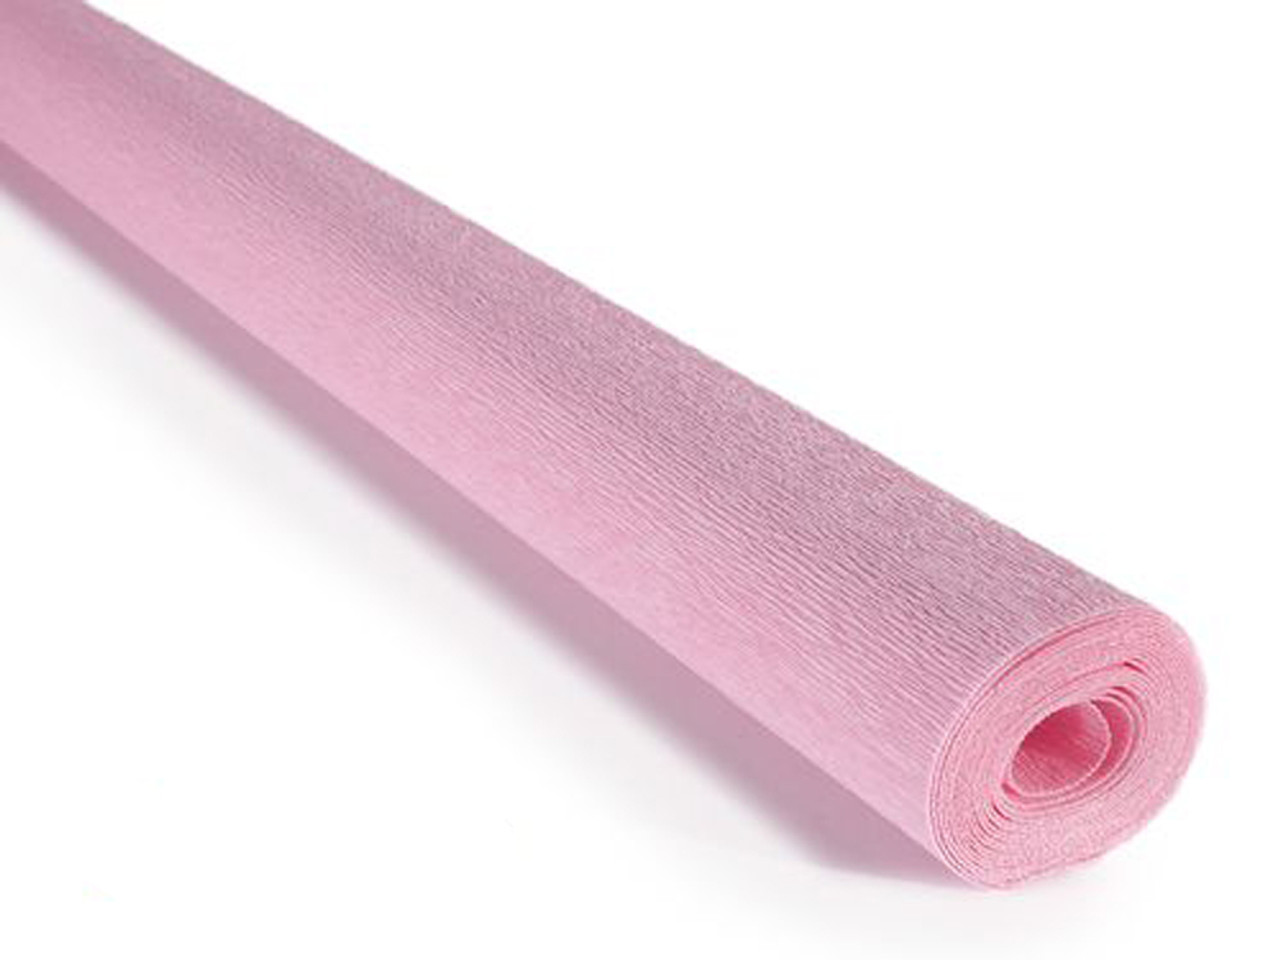 FloristryWarehouse Crepe Paper roll Lite 140g (20 Inches Wide x 8ft Long)  Baby Blush Pink (Shade 969)